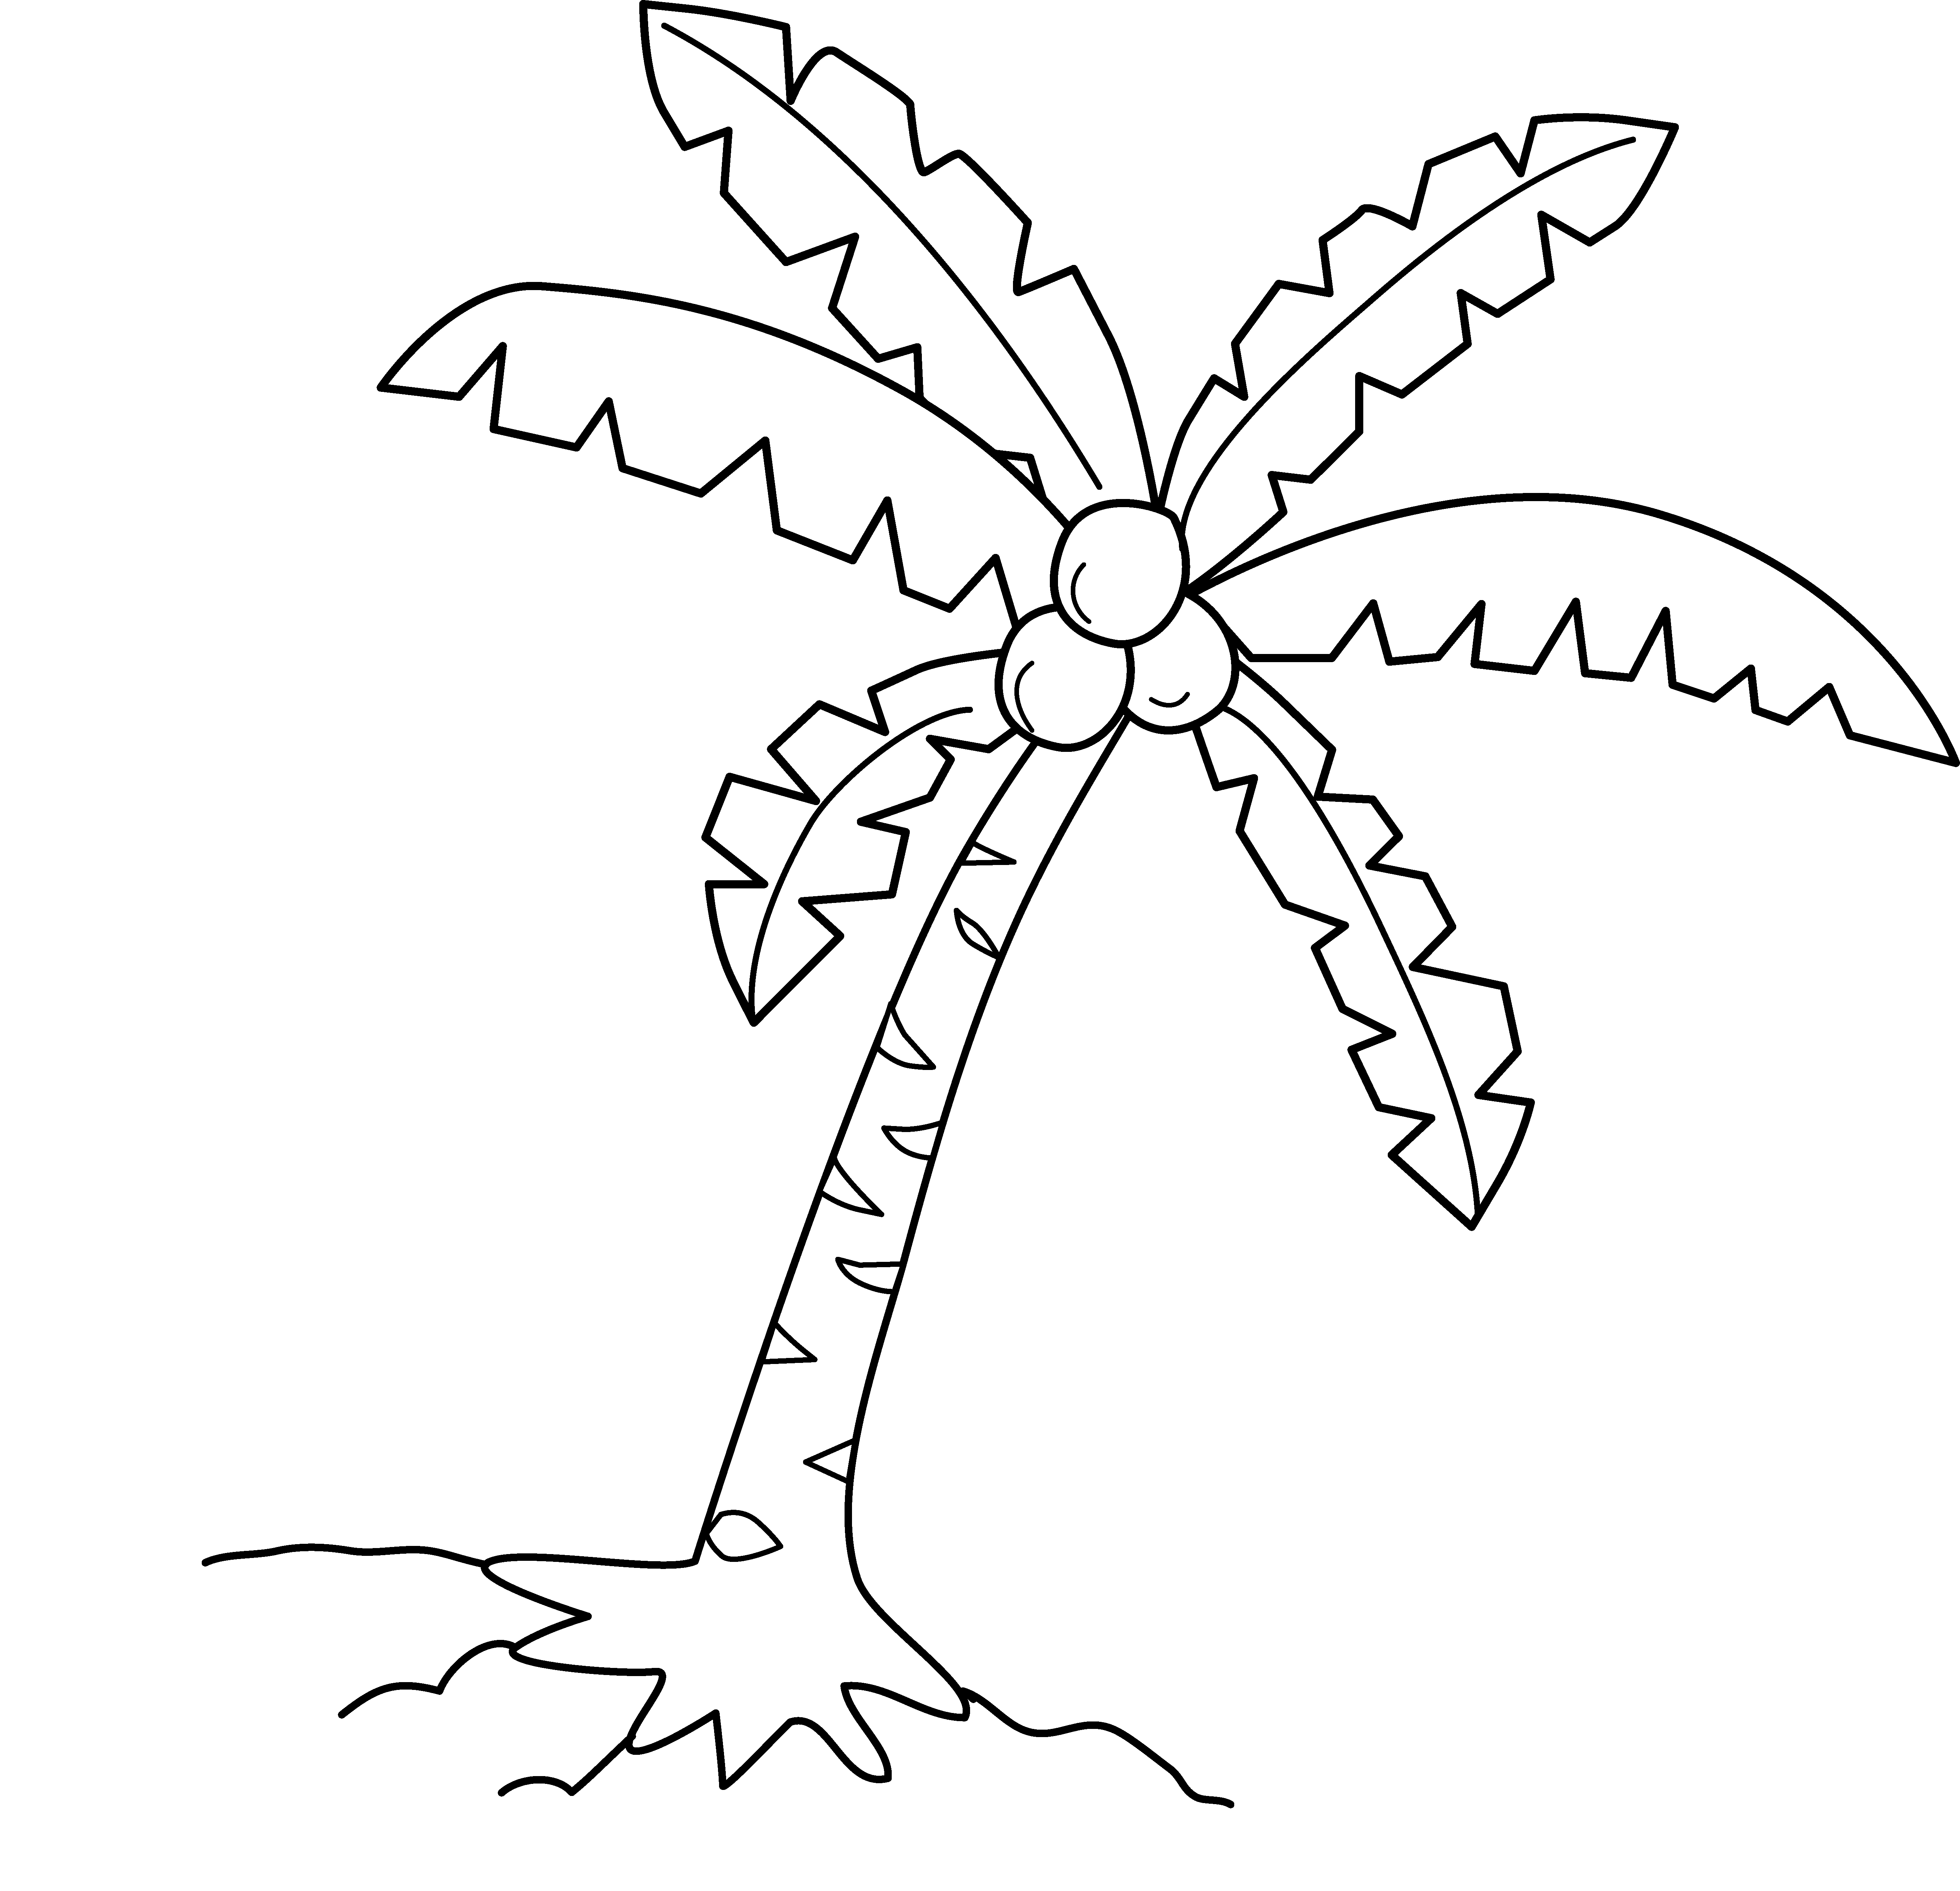 Tree coloring page free. Coconut clipart vacation